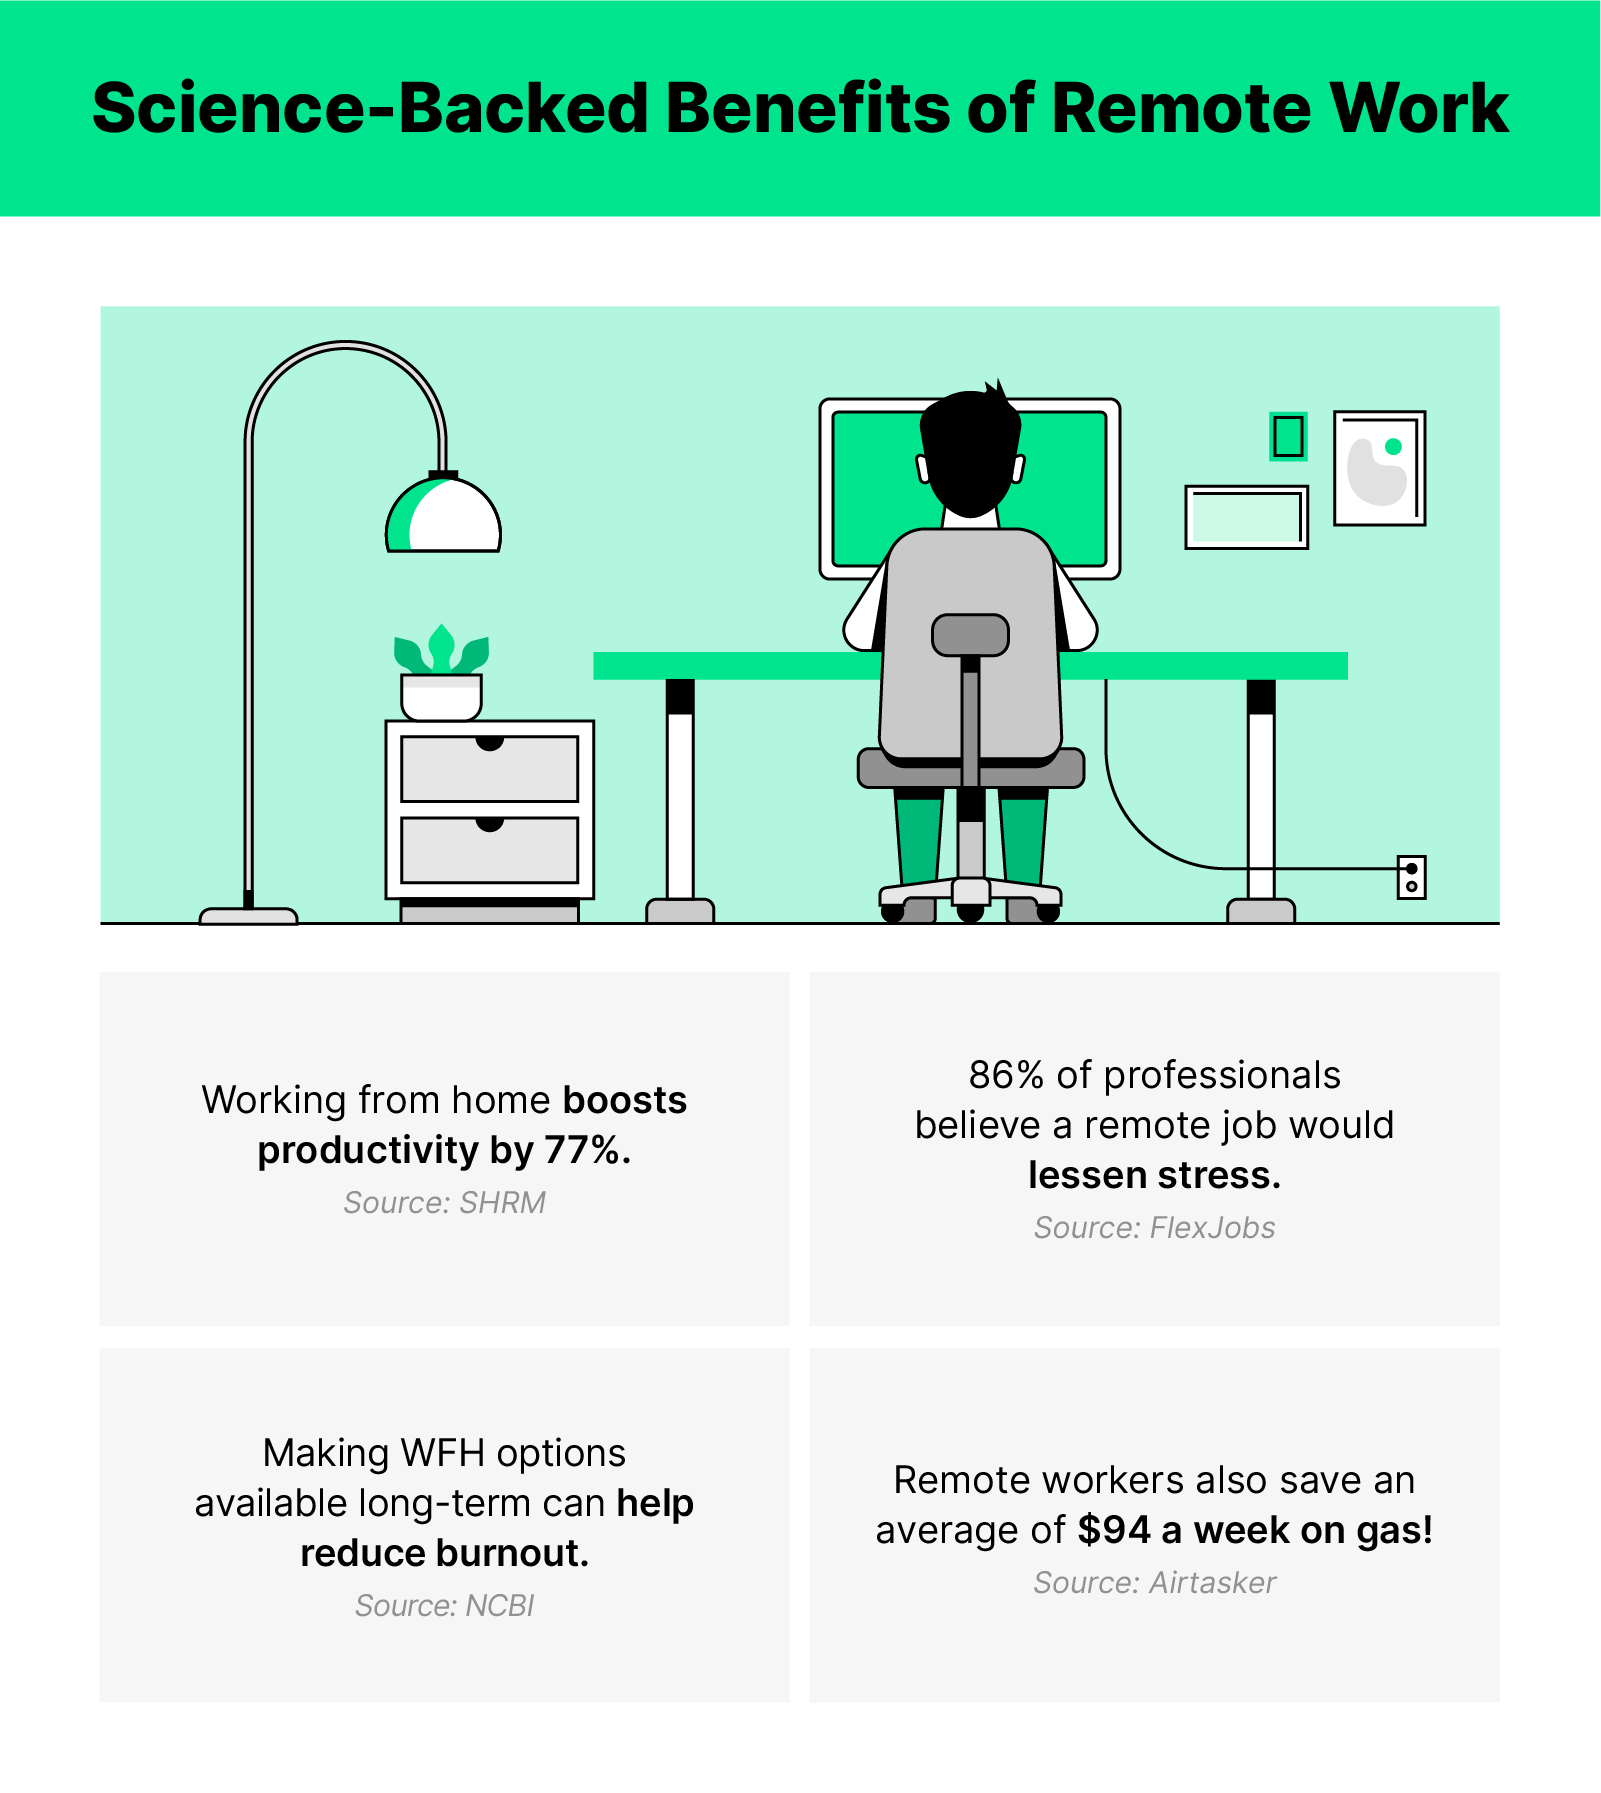 Green black and white illustration of someone working in a home office with benefits listed below